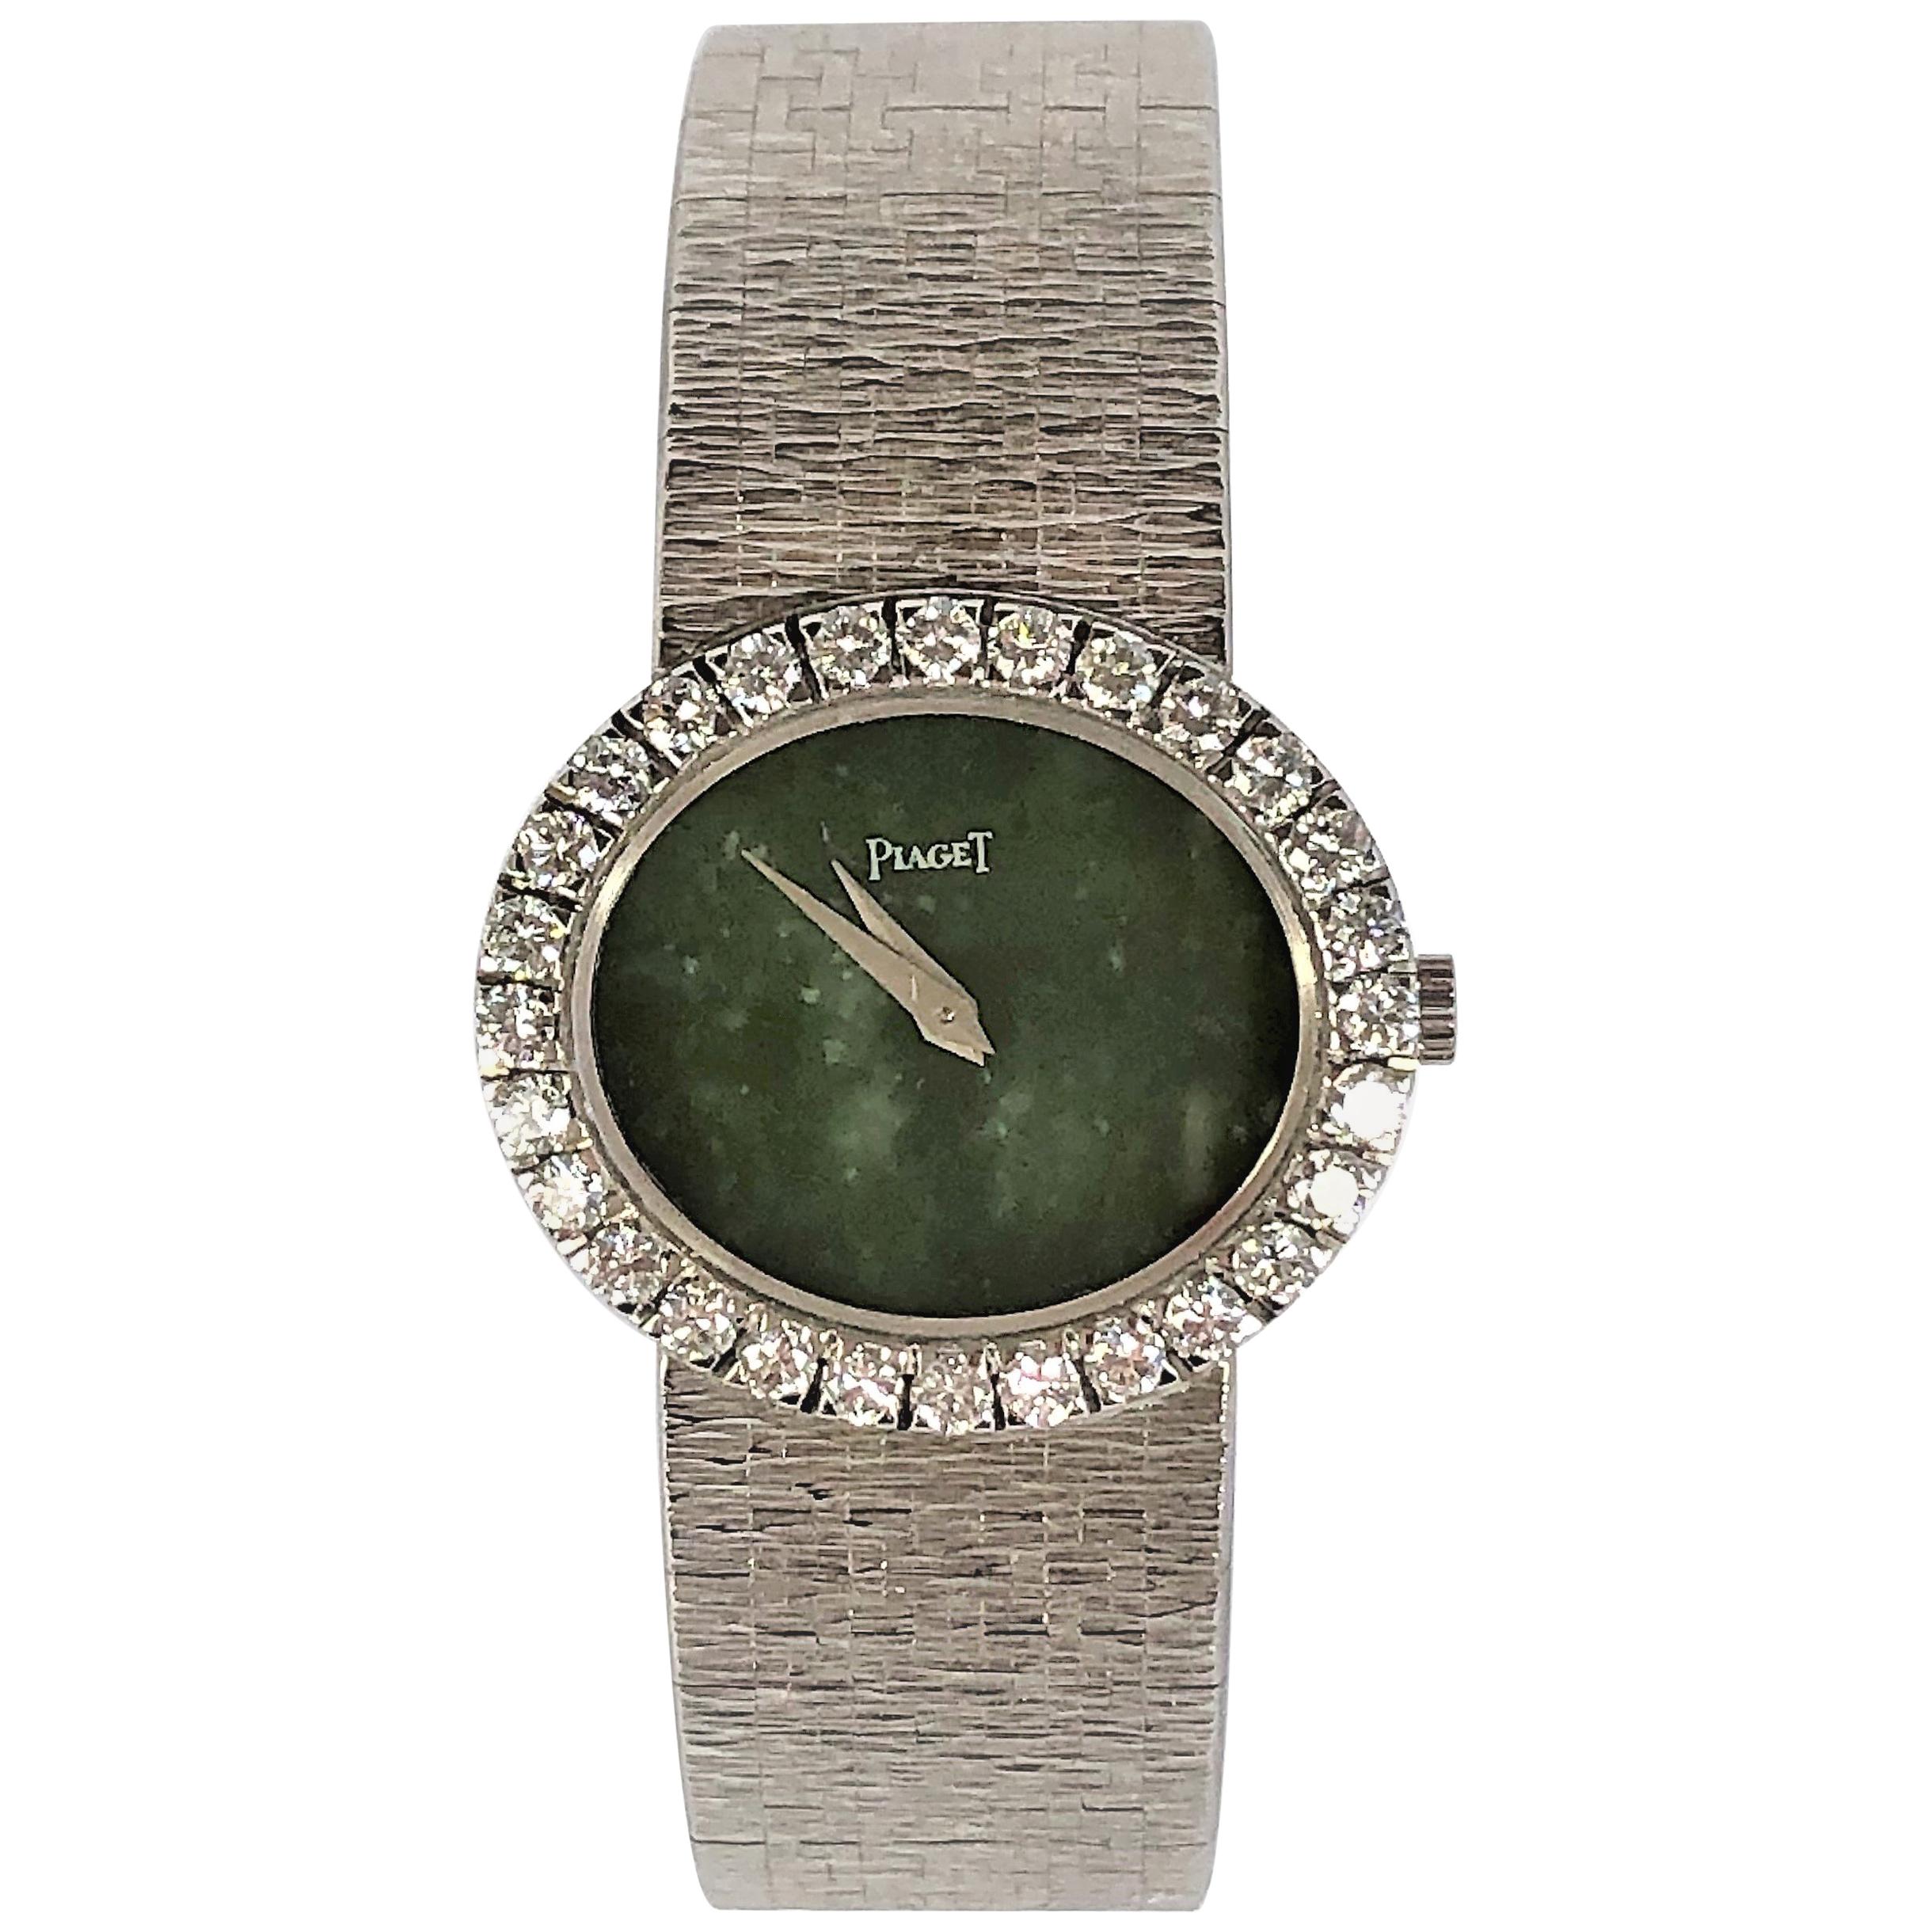 Ladies White Gold Piaget Watch with Oval Shaped Jade Dial and Diamond Bezel